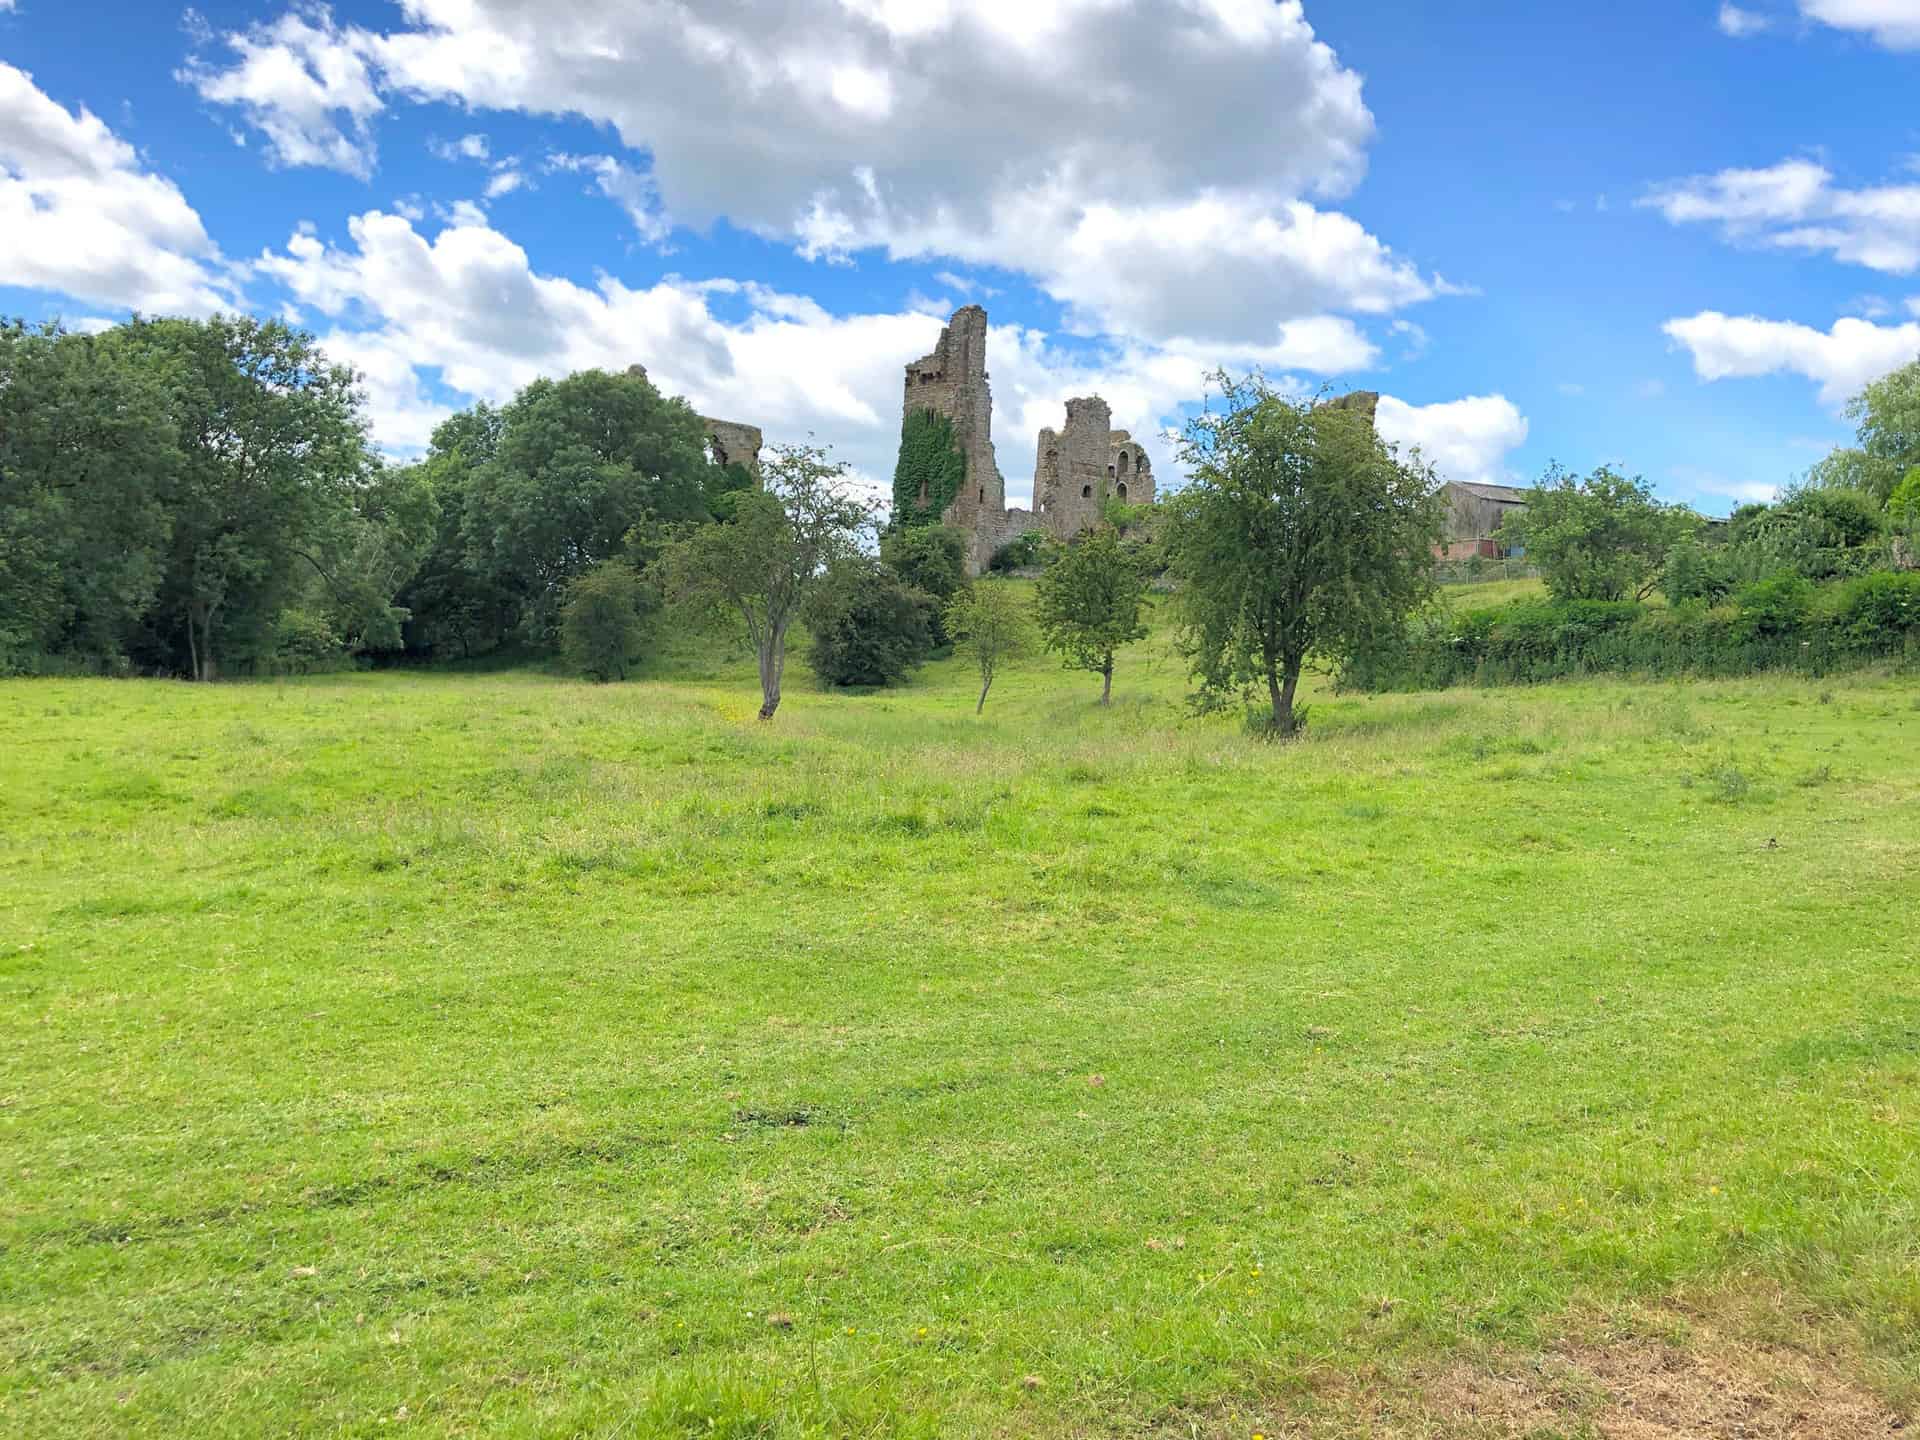 Today, Sheriff Hutton Castle stands as a testament to England's rich history, with sections of its towers remaining as evidence of its former grandeur.